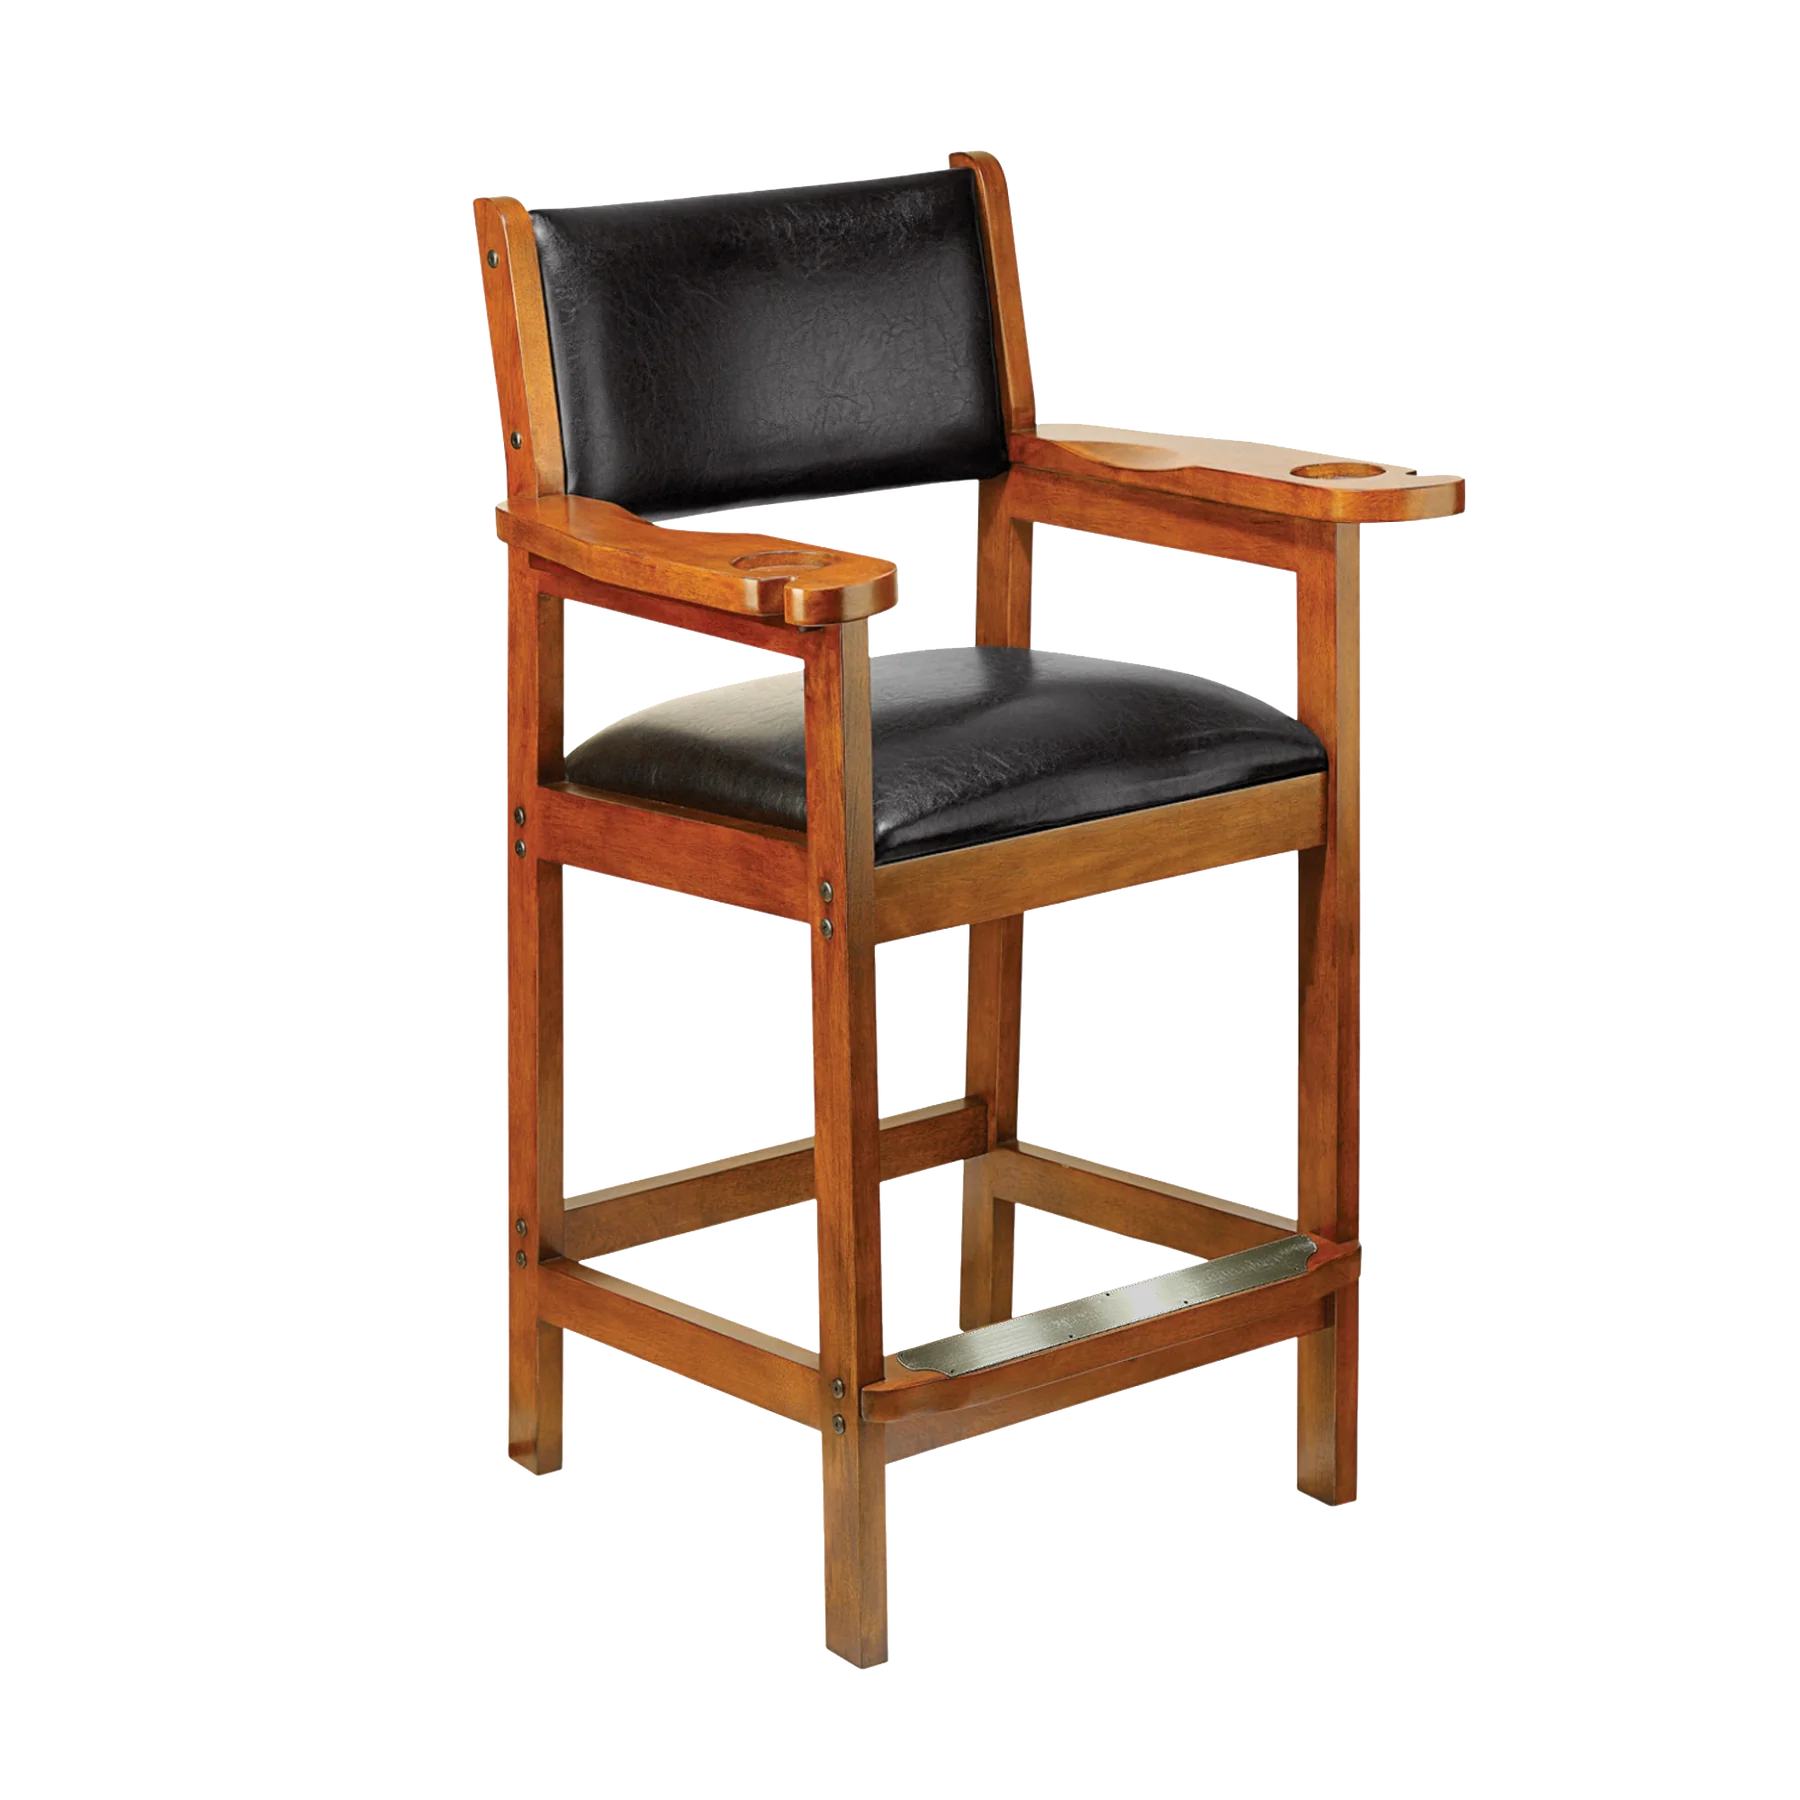 American Heritage Billiards SCD Spectator Chair in Old World Mahogany